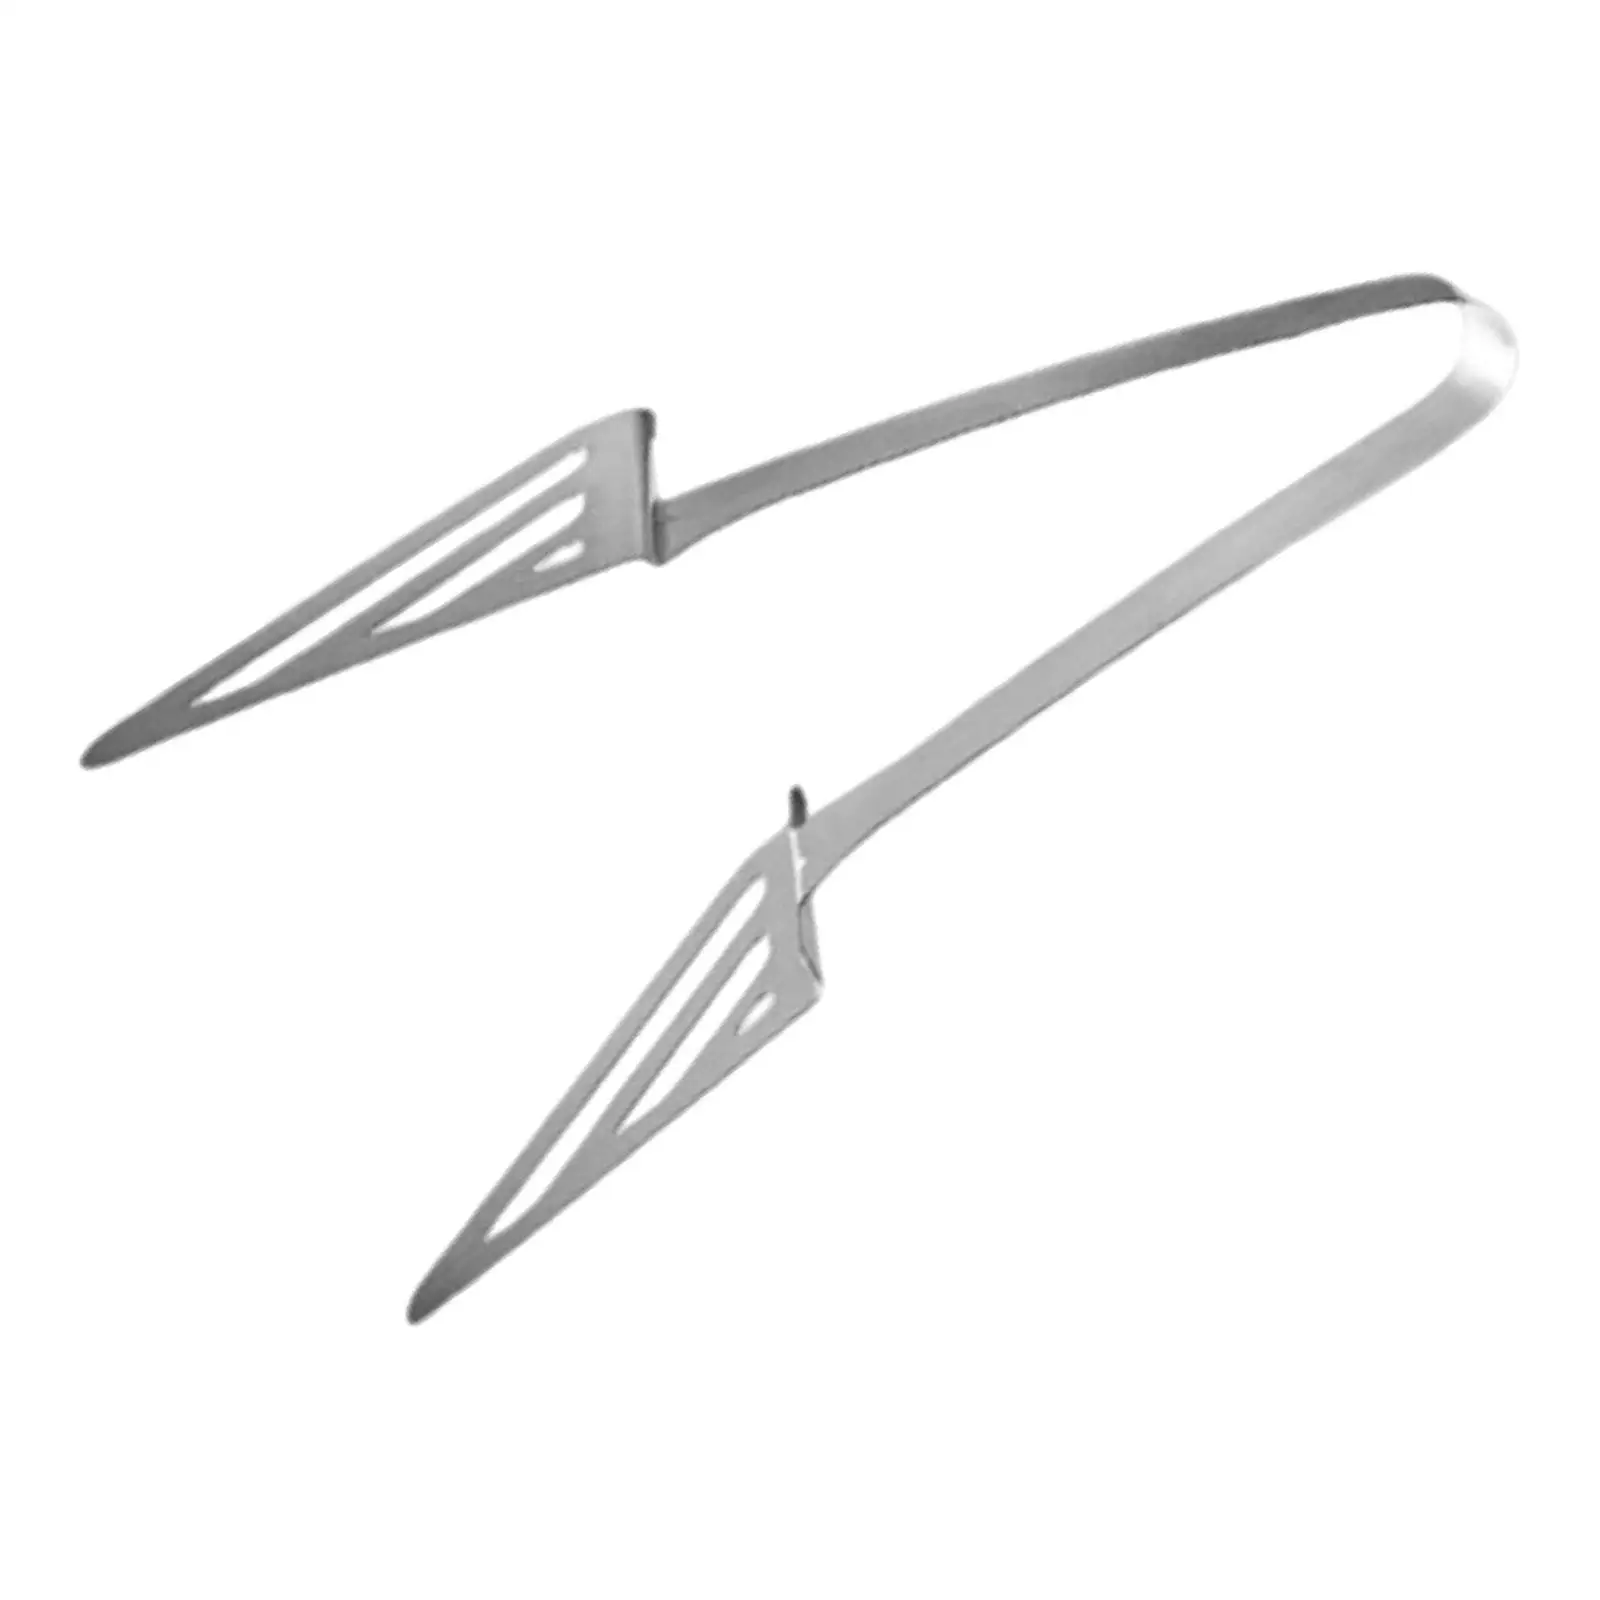 Serving Tongs Stainless Steel Cooking Tongs Kitchen Gadgets Food Clip Pastry Tongs for Kitchen Restaurant BBQ Bakery Cookie